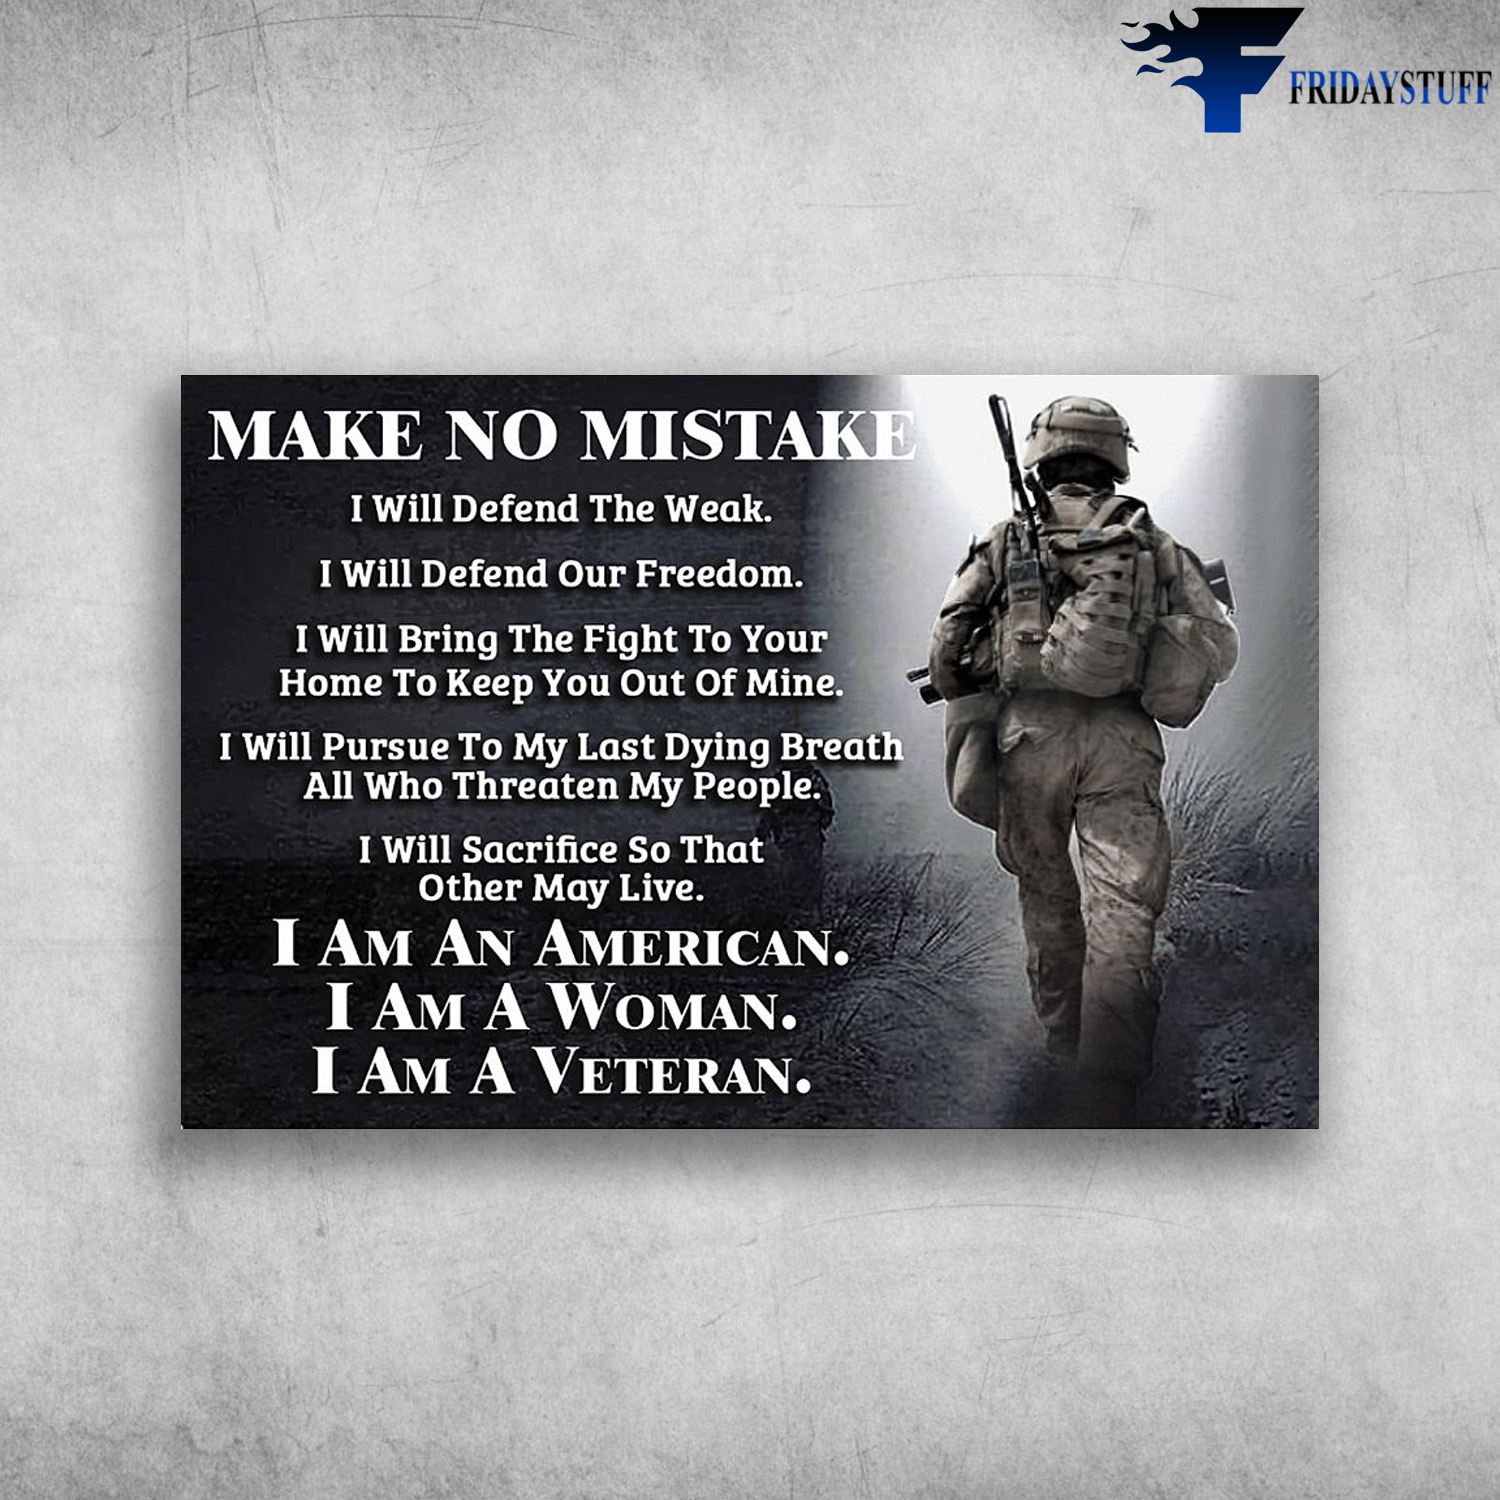 American Veterans - Make No Mistake, I Will Defend The Weak, I Will Defend Our Freedom, I Will Bring The Fight To Your, Home To Keep You Out Of Mine, I Will Pursue To My Last Dying Breath